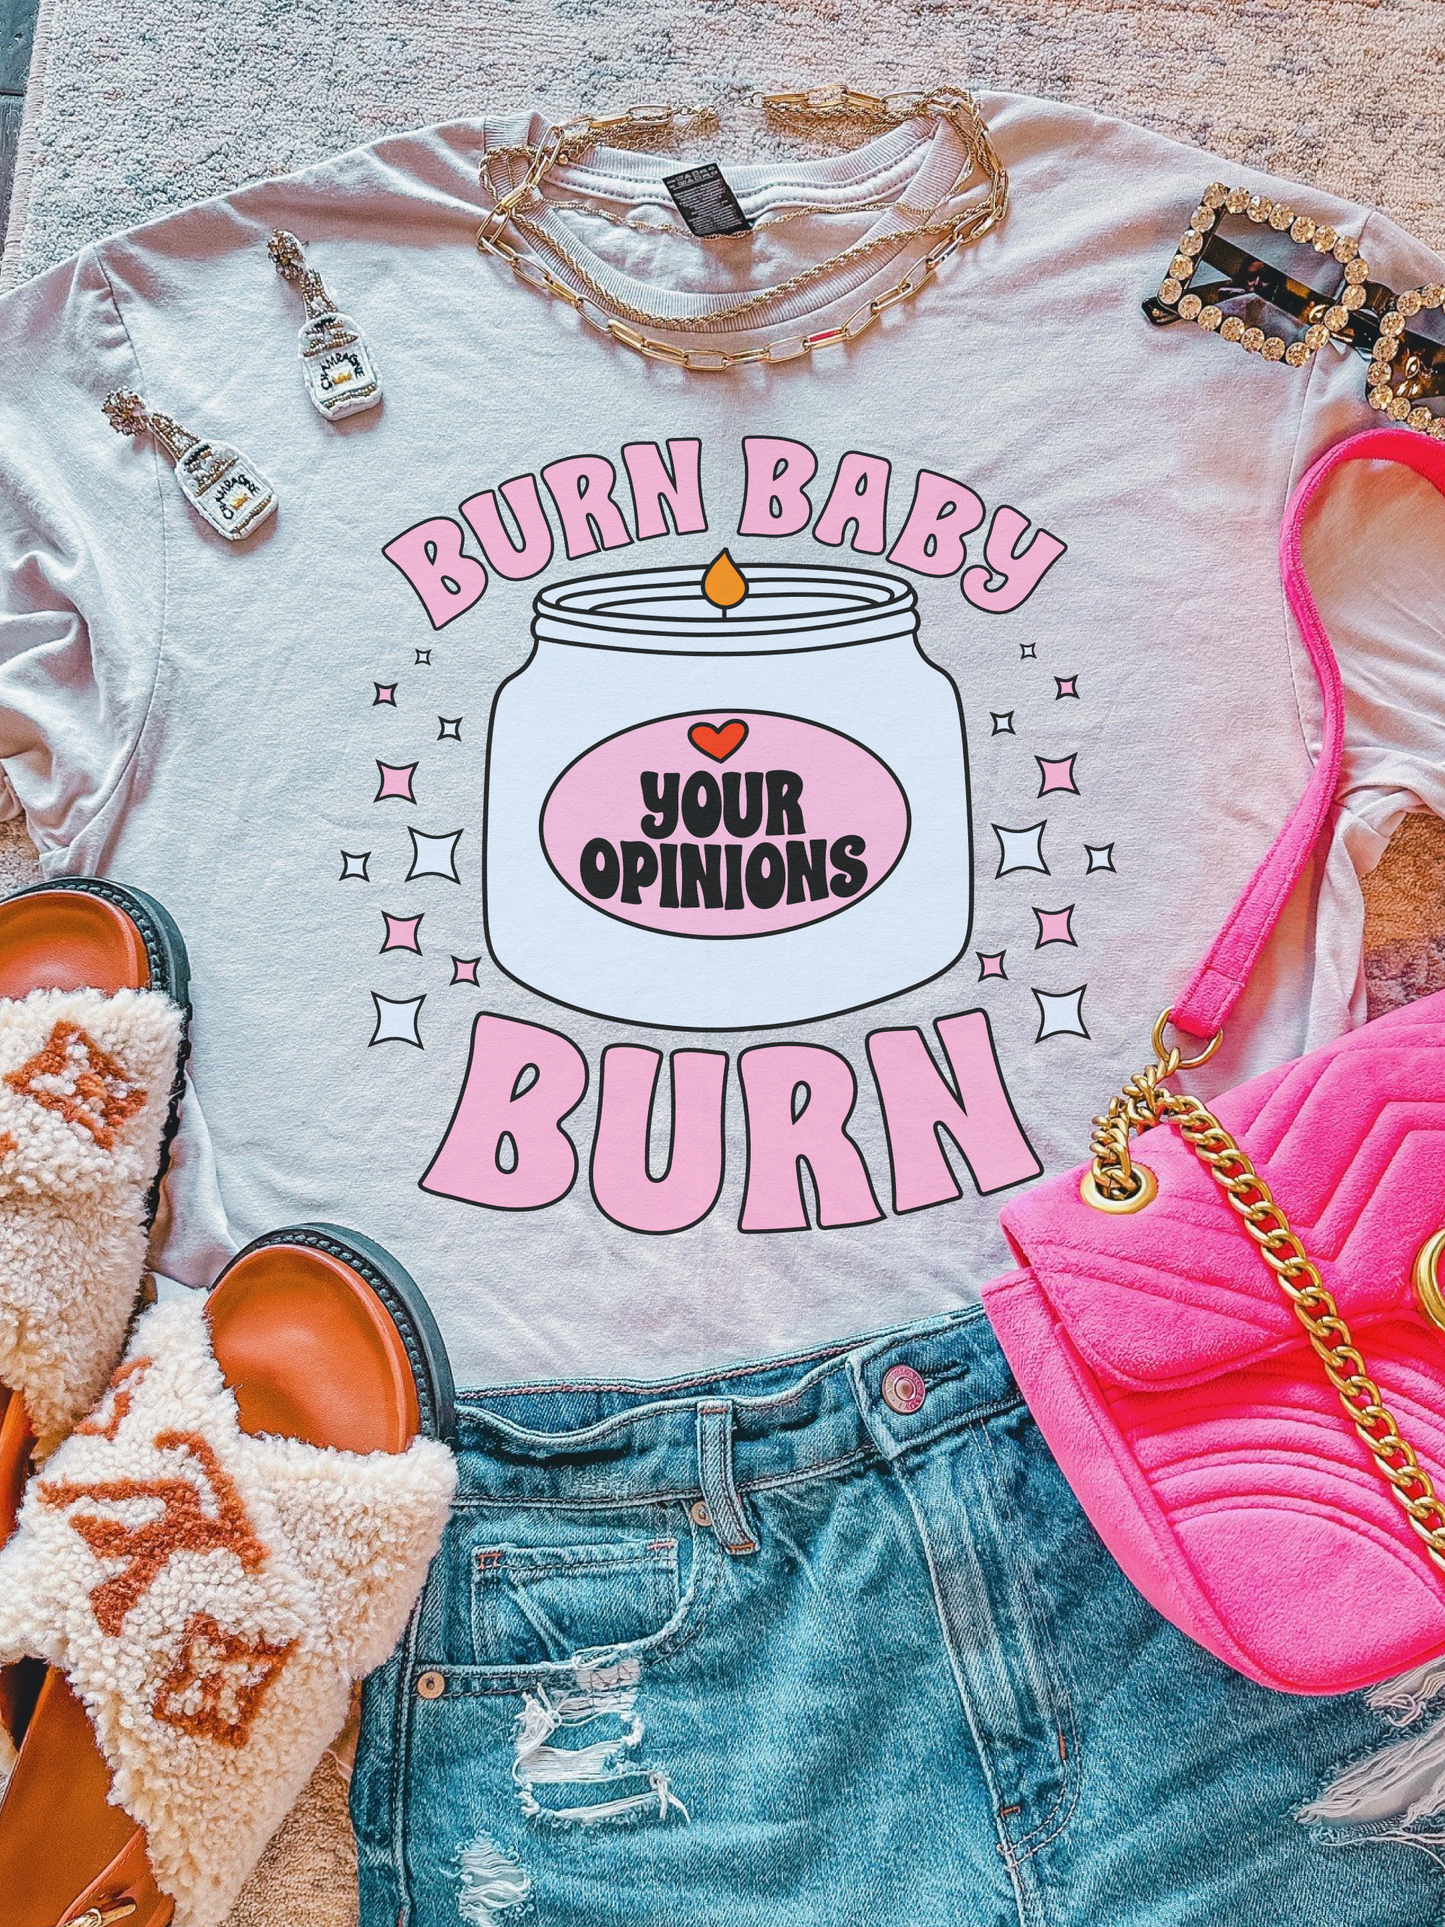 Burn Baby Burn (Your Opinions) ~ NEW